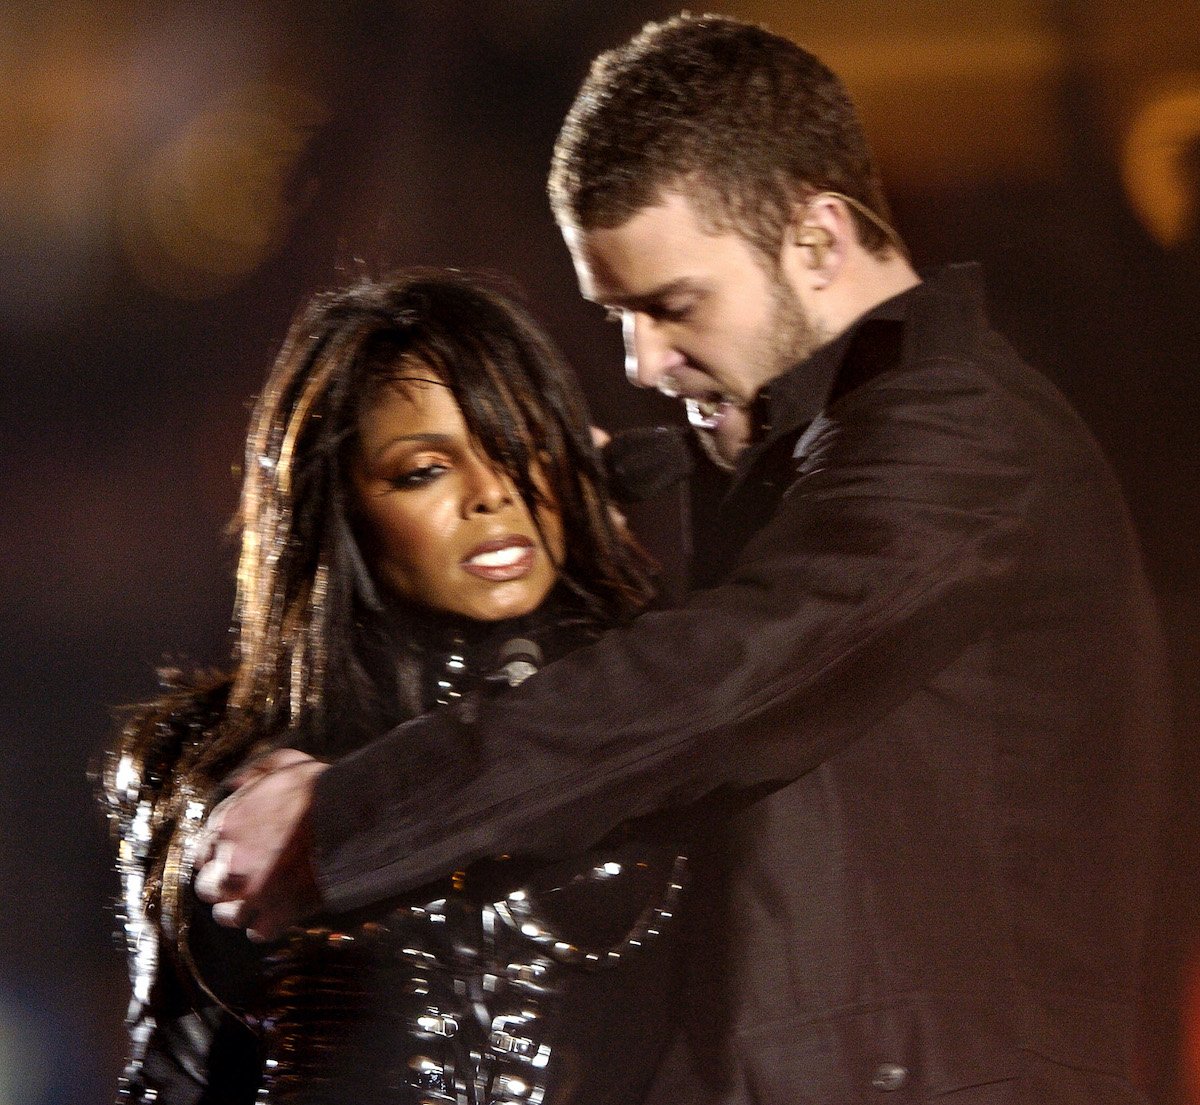 ‘Laguna Beach:’ How Janet Jackson’s Super Bowl Performance Almost Scrapped the Iconic MTV Show